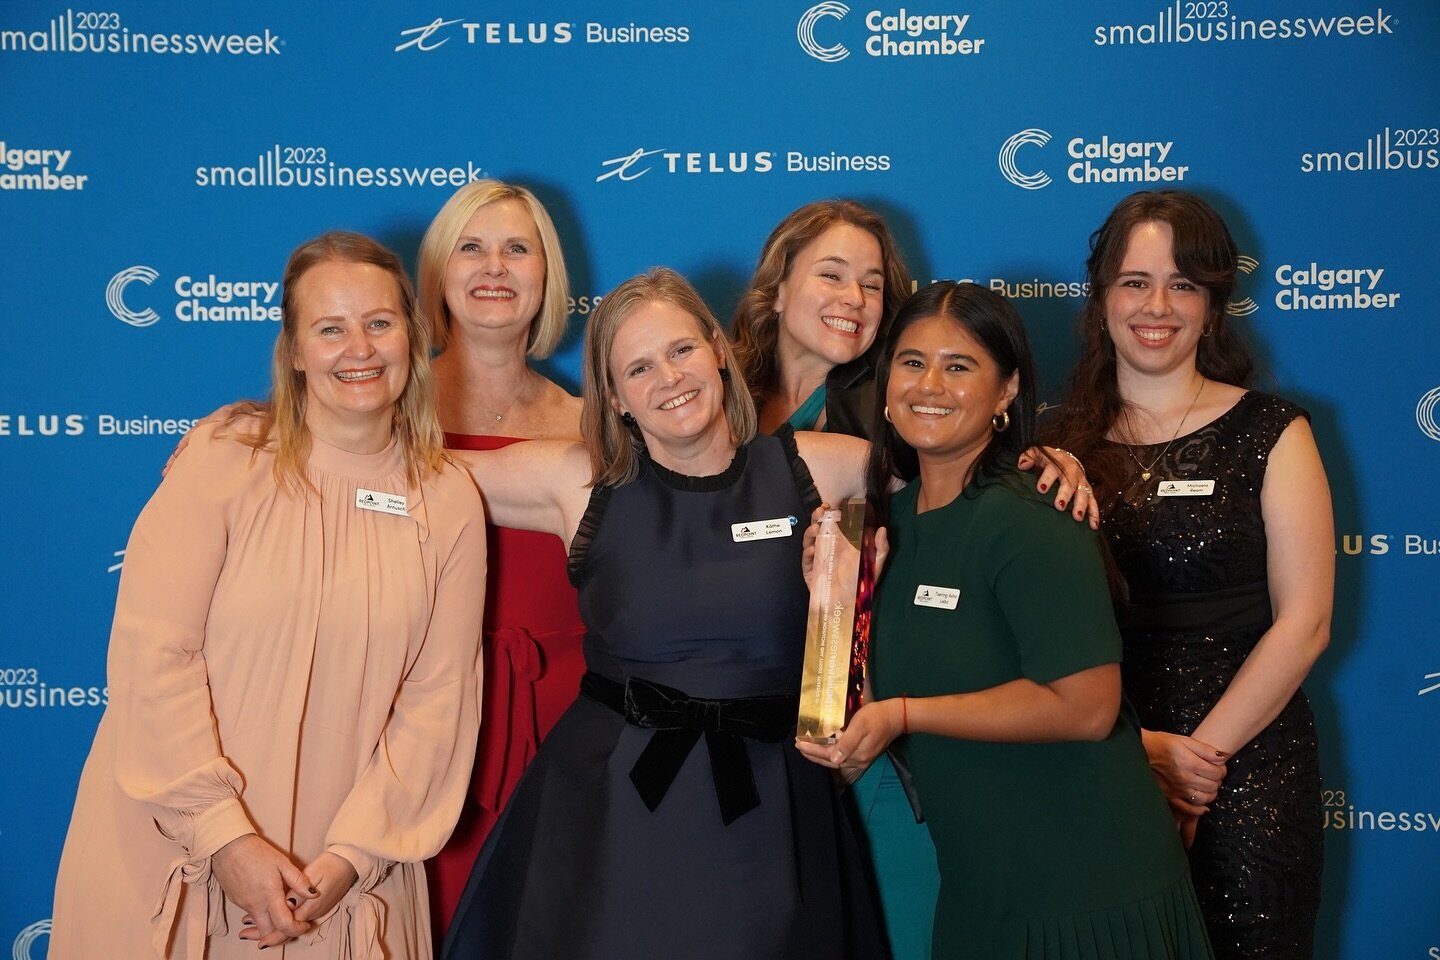 At the 40th Calgary Small Business Awards Gala, presented by the @calgarychamber, we had the honour to co-present the @td_canada  Diversity, Equity and Inclusion Award presented by Pride in Business to @redpointmedia for the work shown in their workp